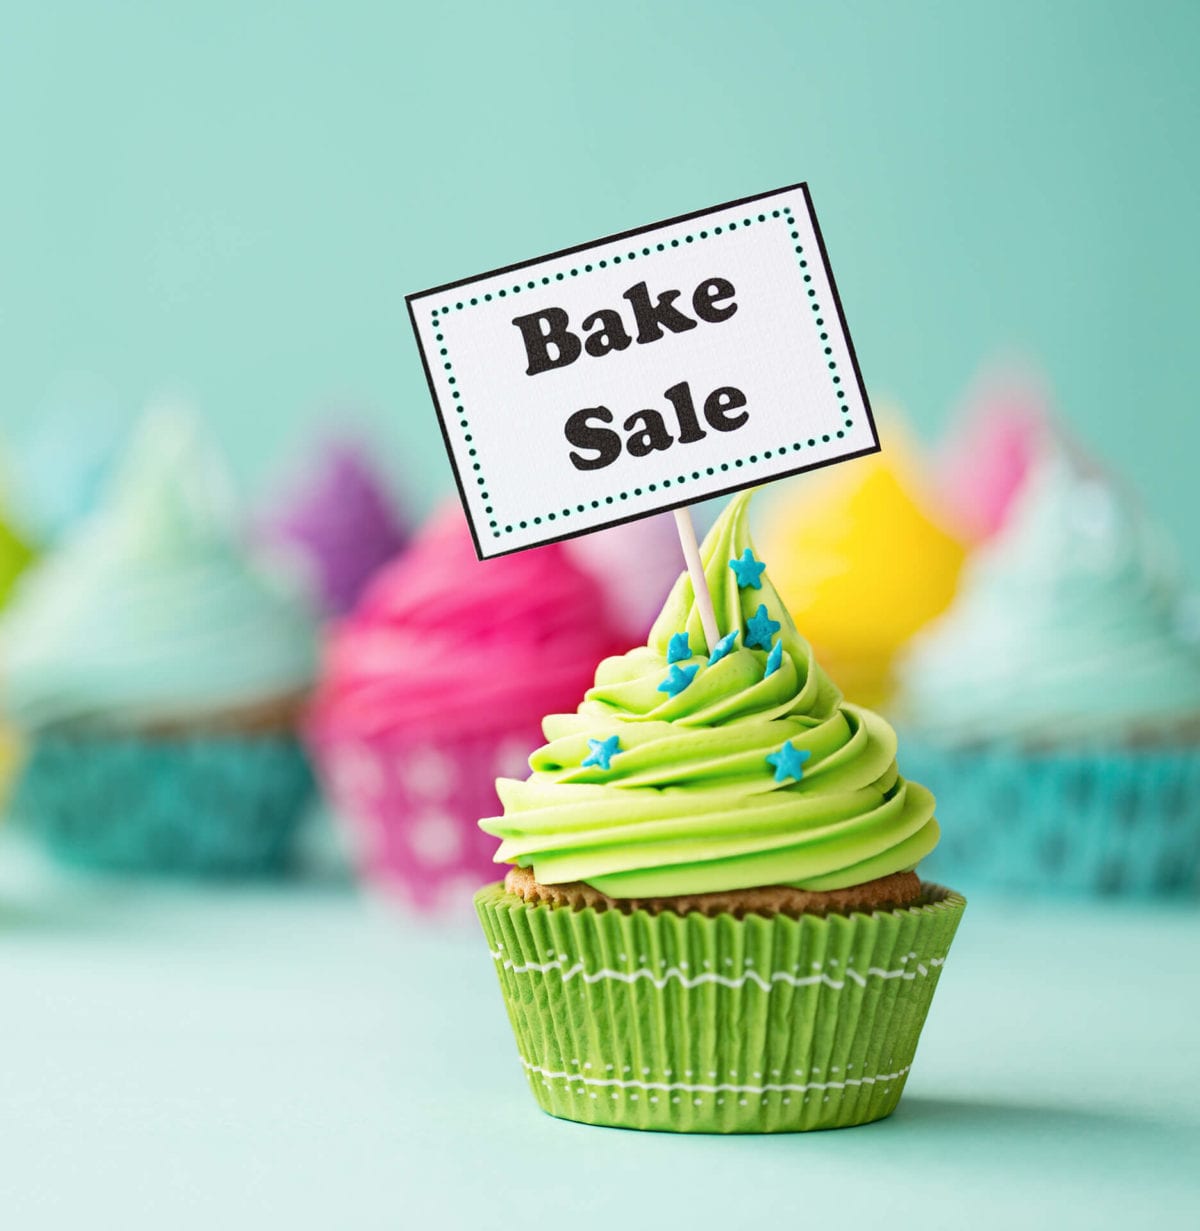 Cupcake with sign that says "Bake Sale"